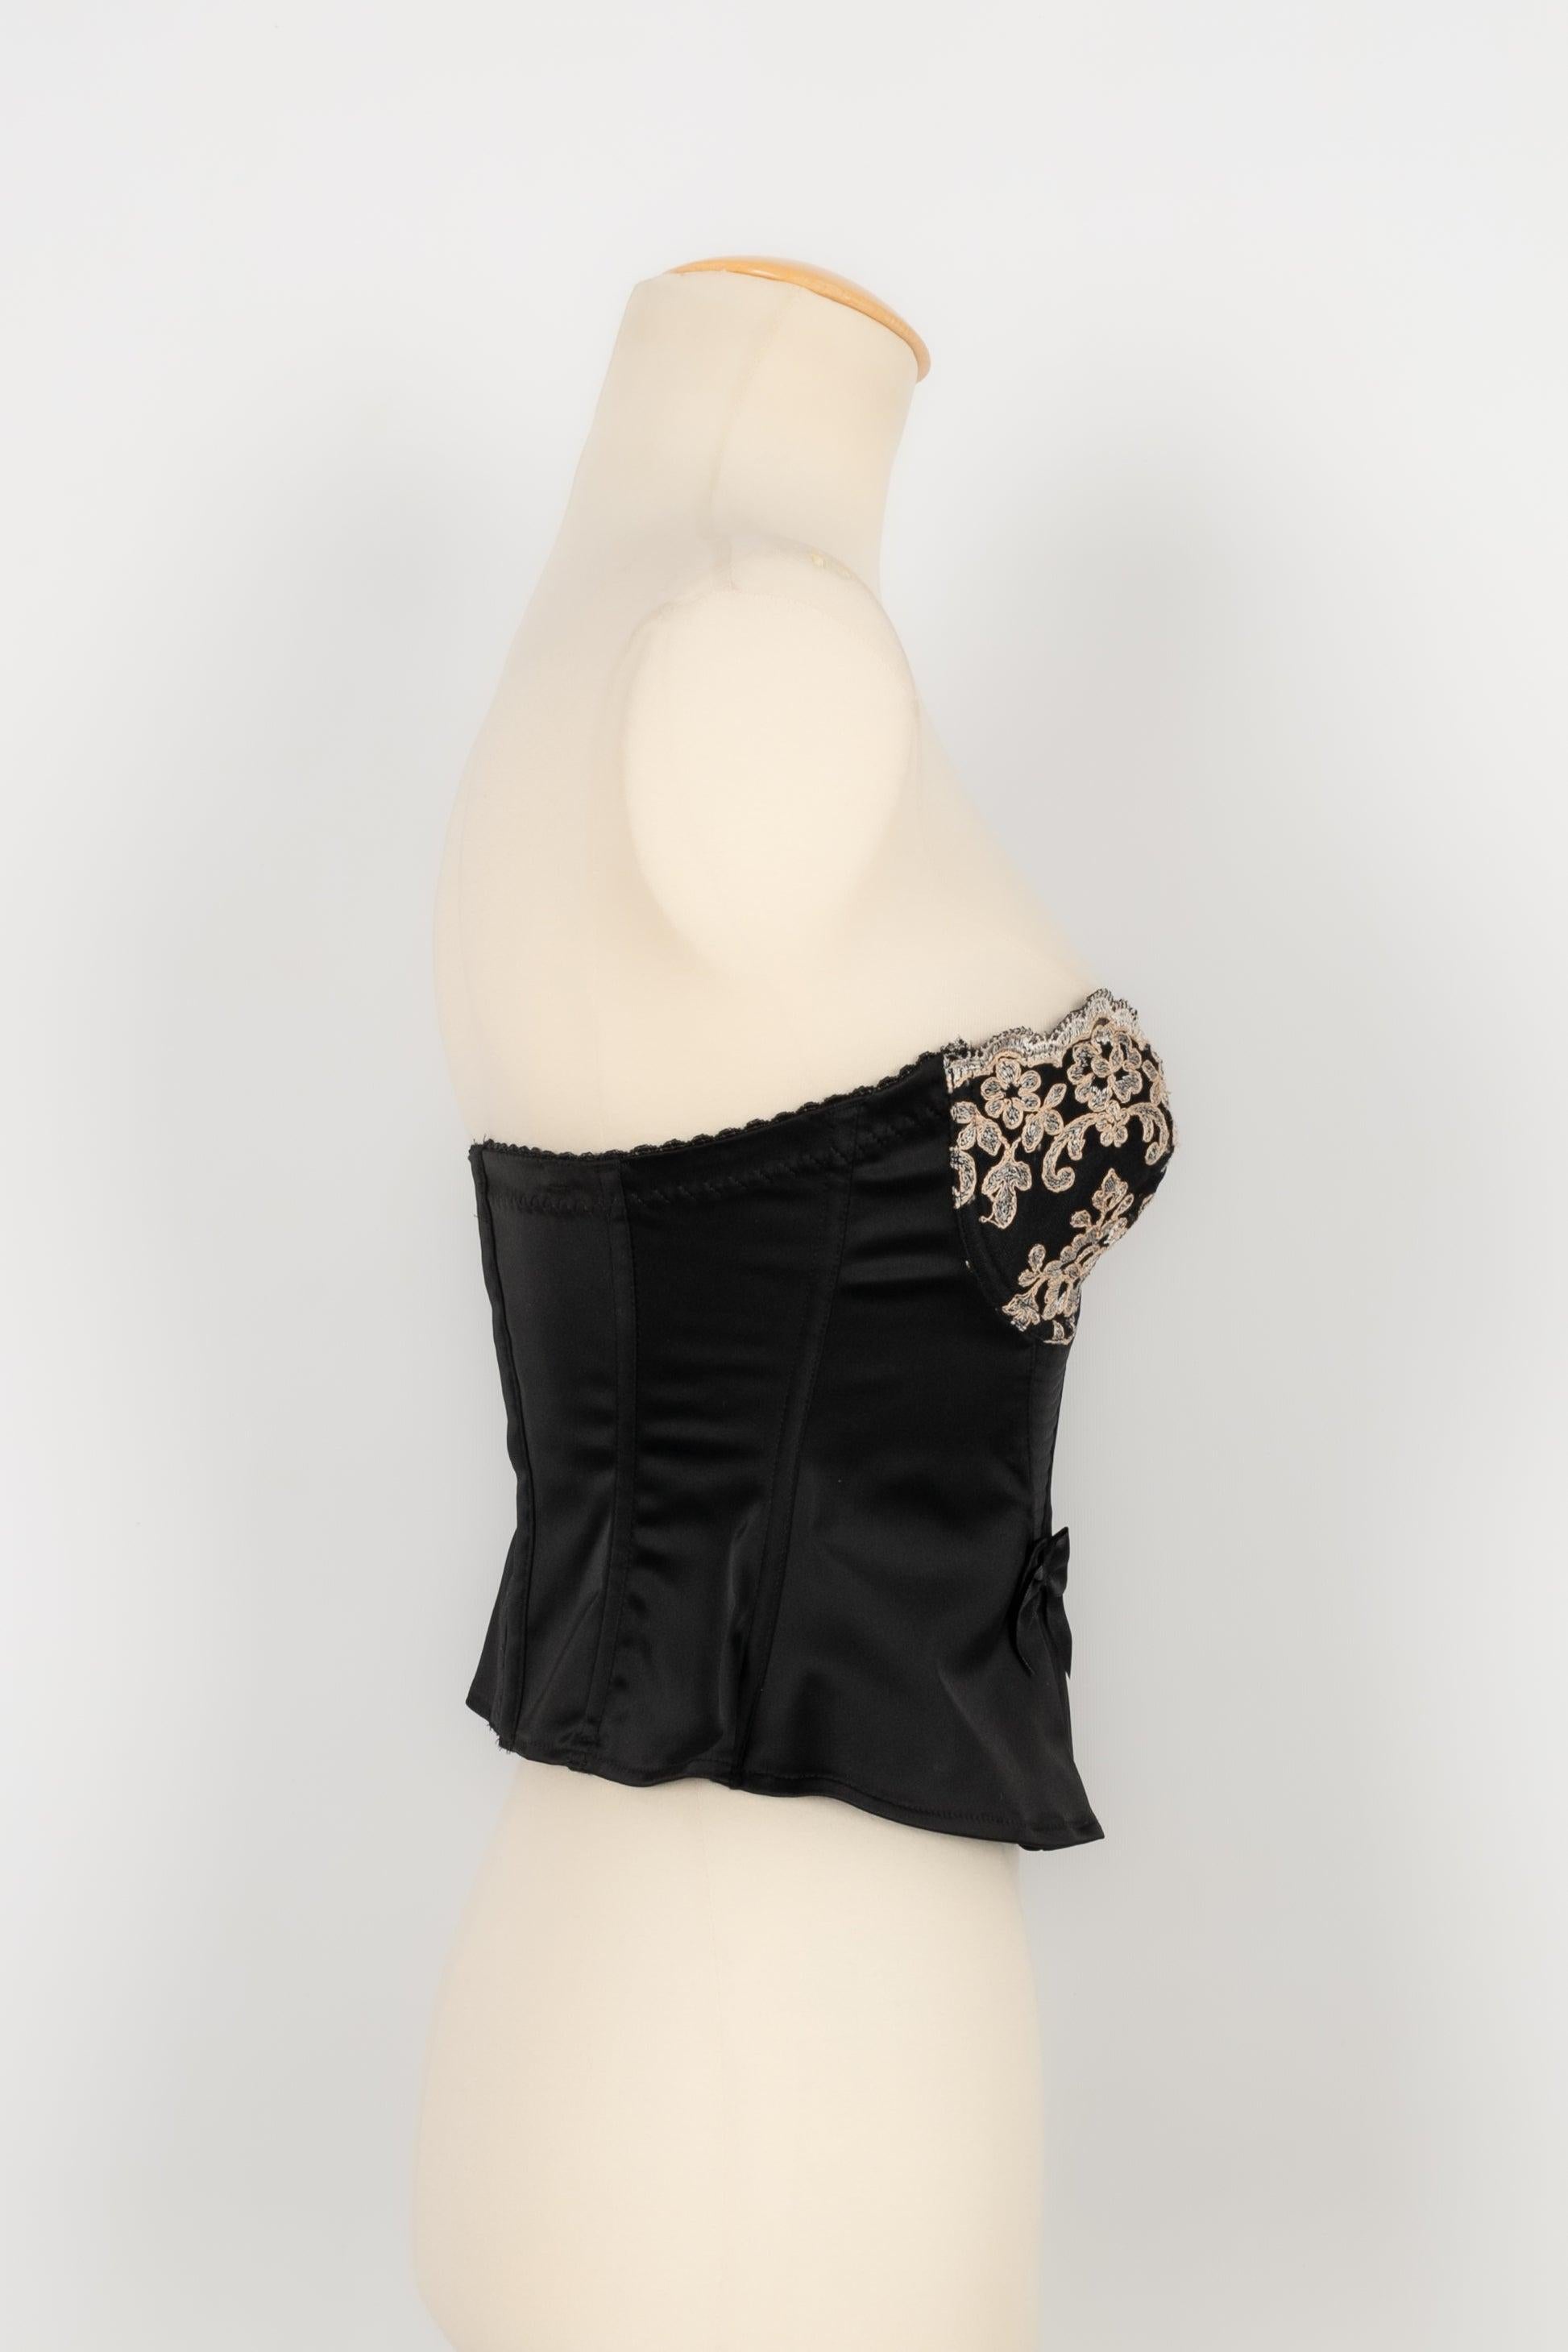 Nina Ricci Black Bustier Top with Embroidery Decorations 36FR For Sale 1